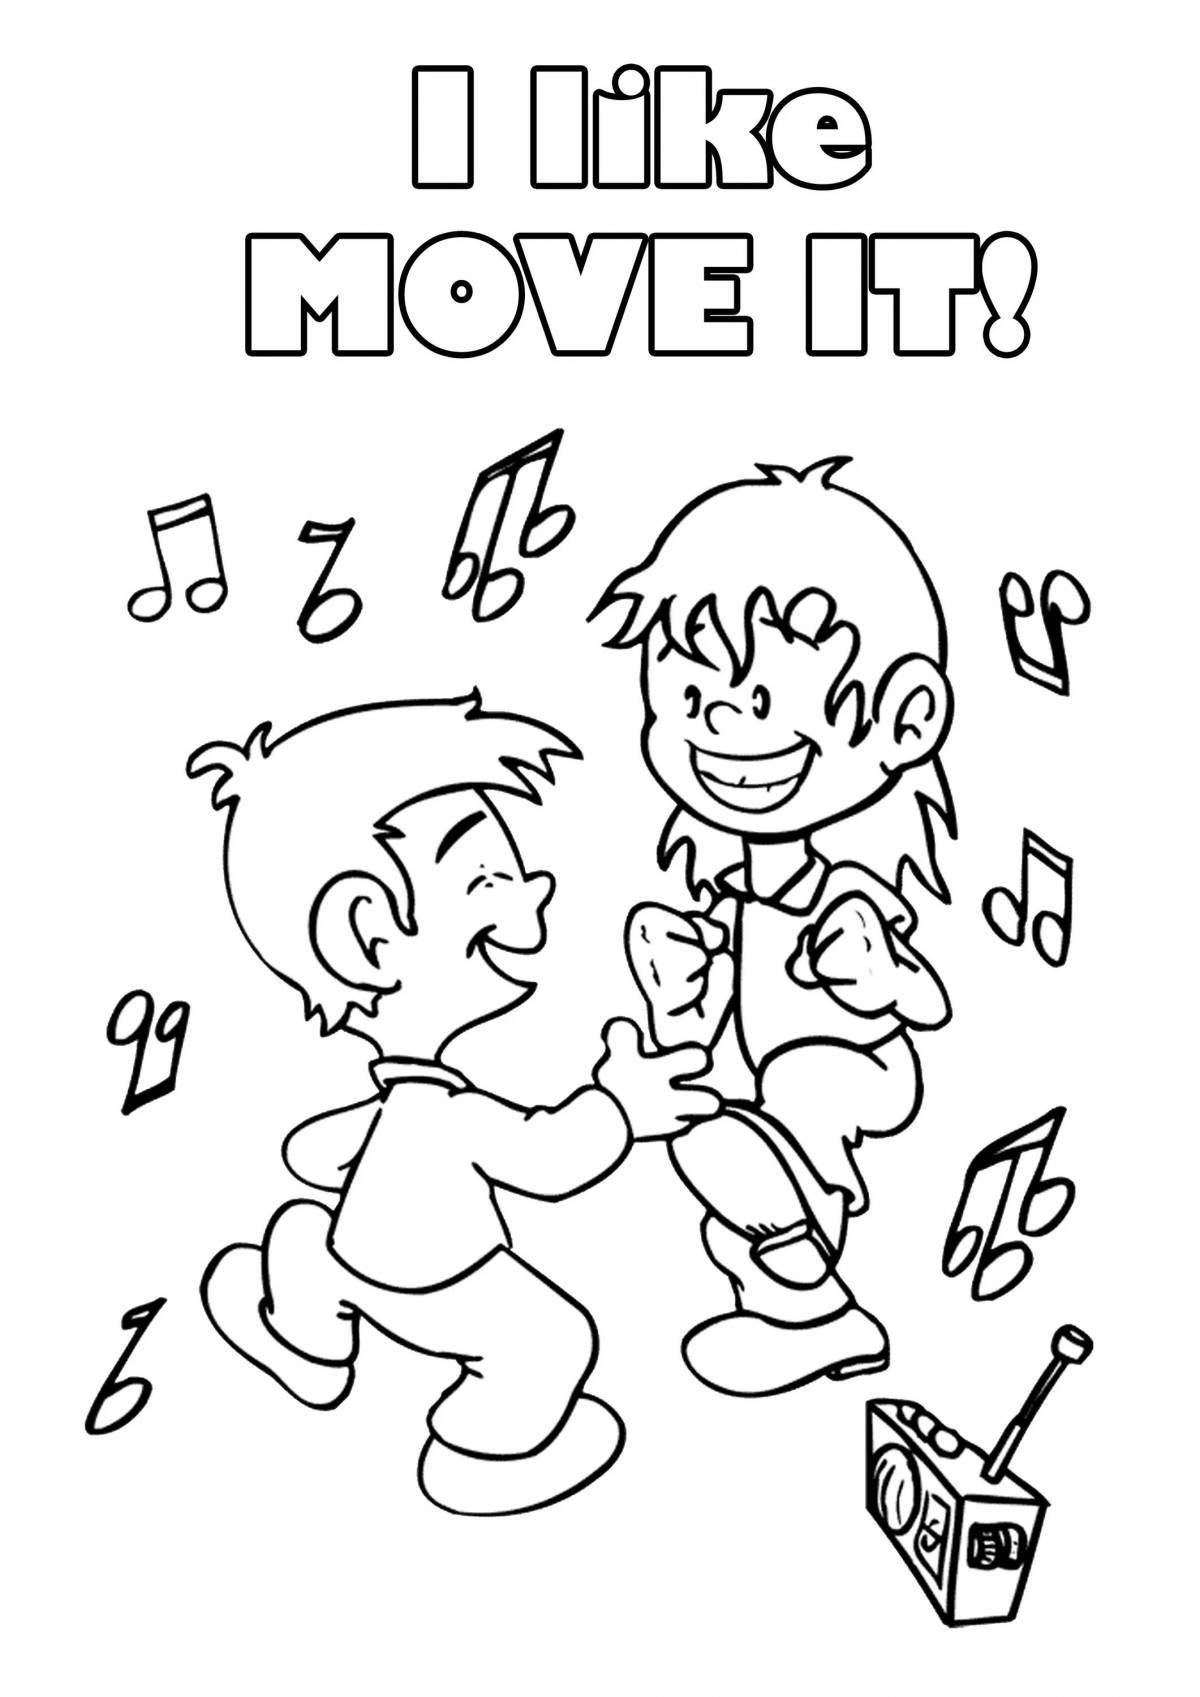 Children's dancing coloring book for kids